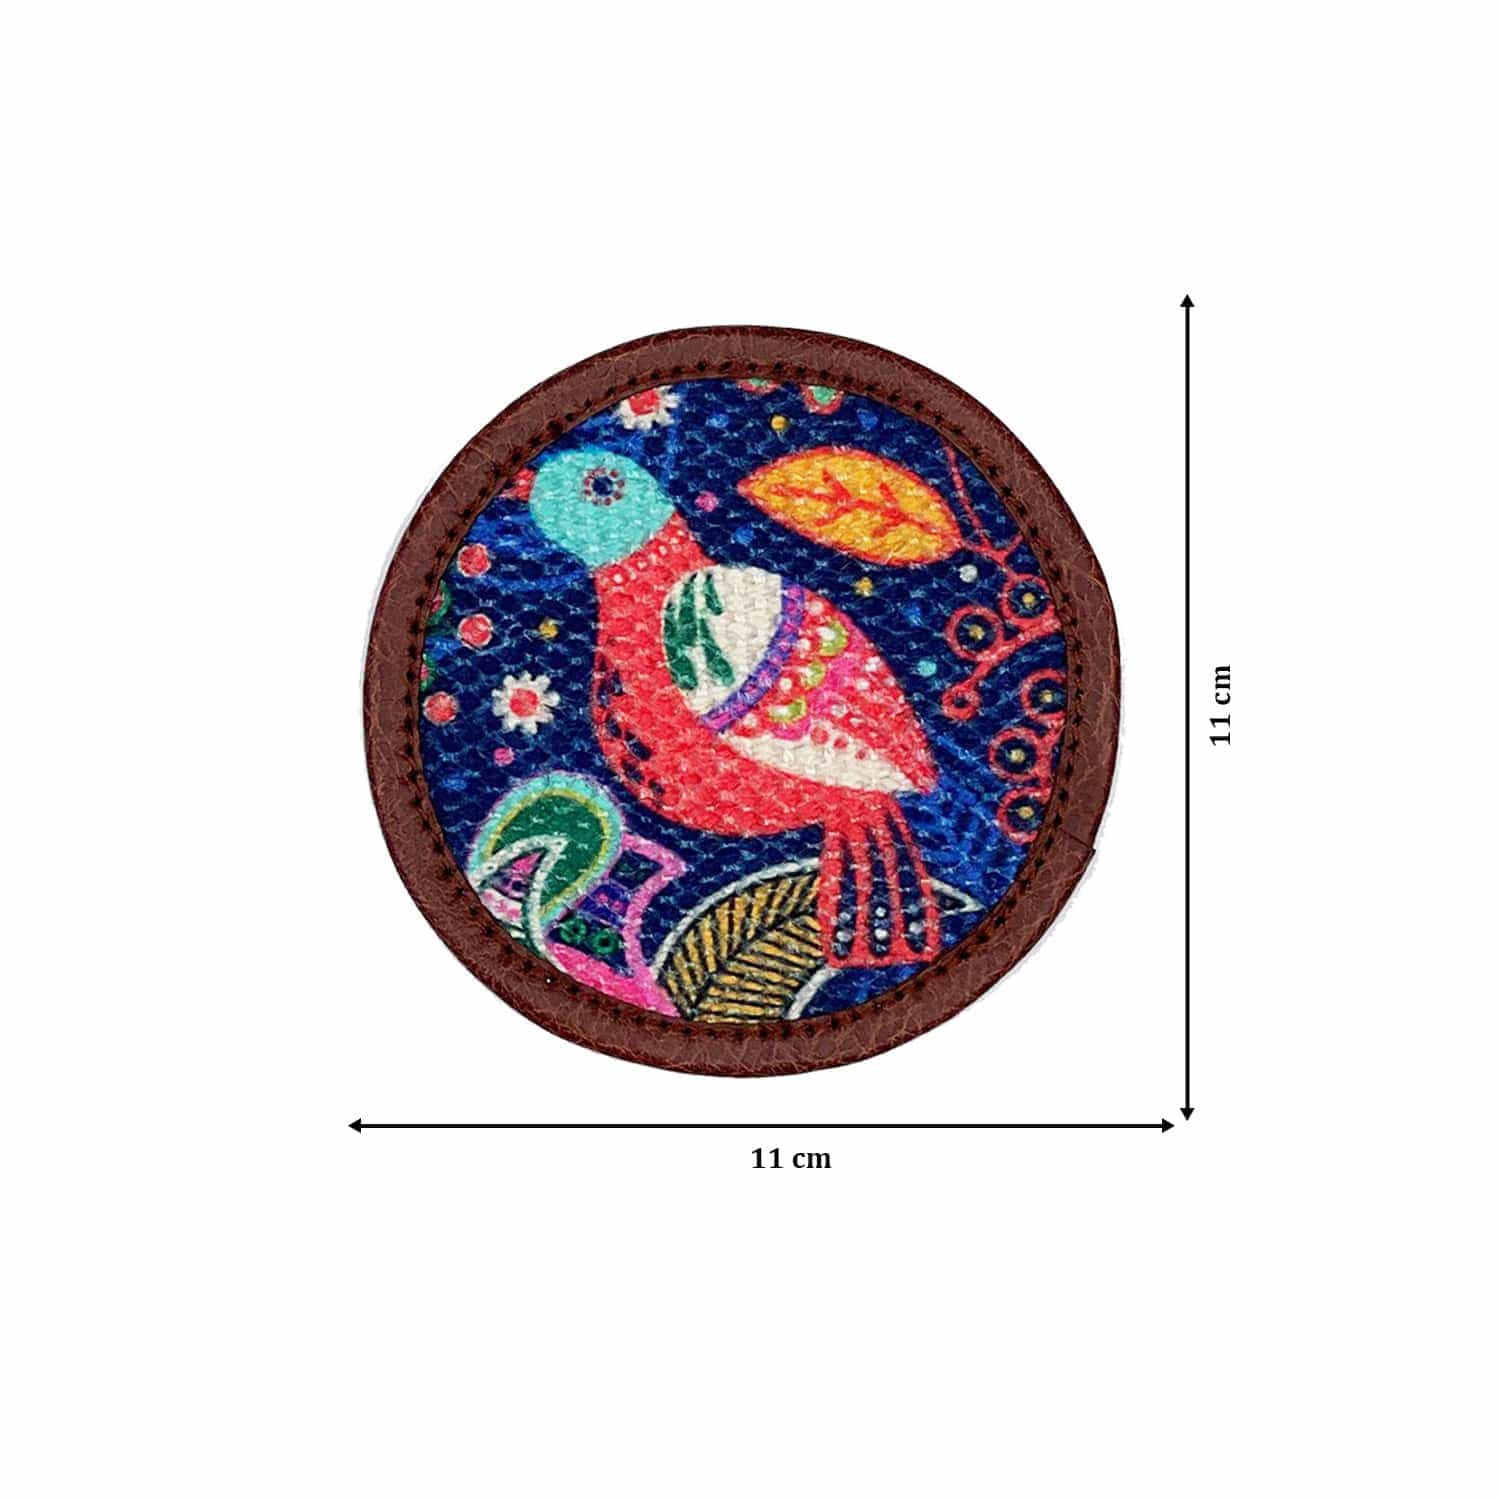 Mona B Set of 4 Printed Coasters, 4.5 INCH Round, Best for Bed-Side Table/Center Table, Dining Table - PC-111 - Coaster by Mona-B - Shop1999, Shop2999, Shop3999